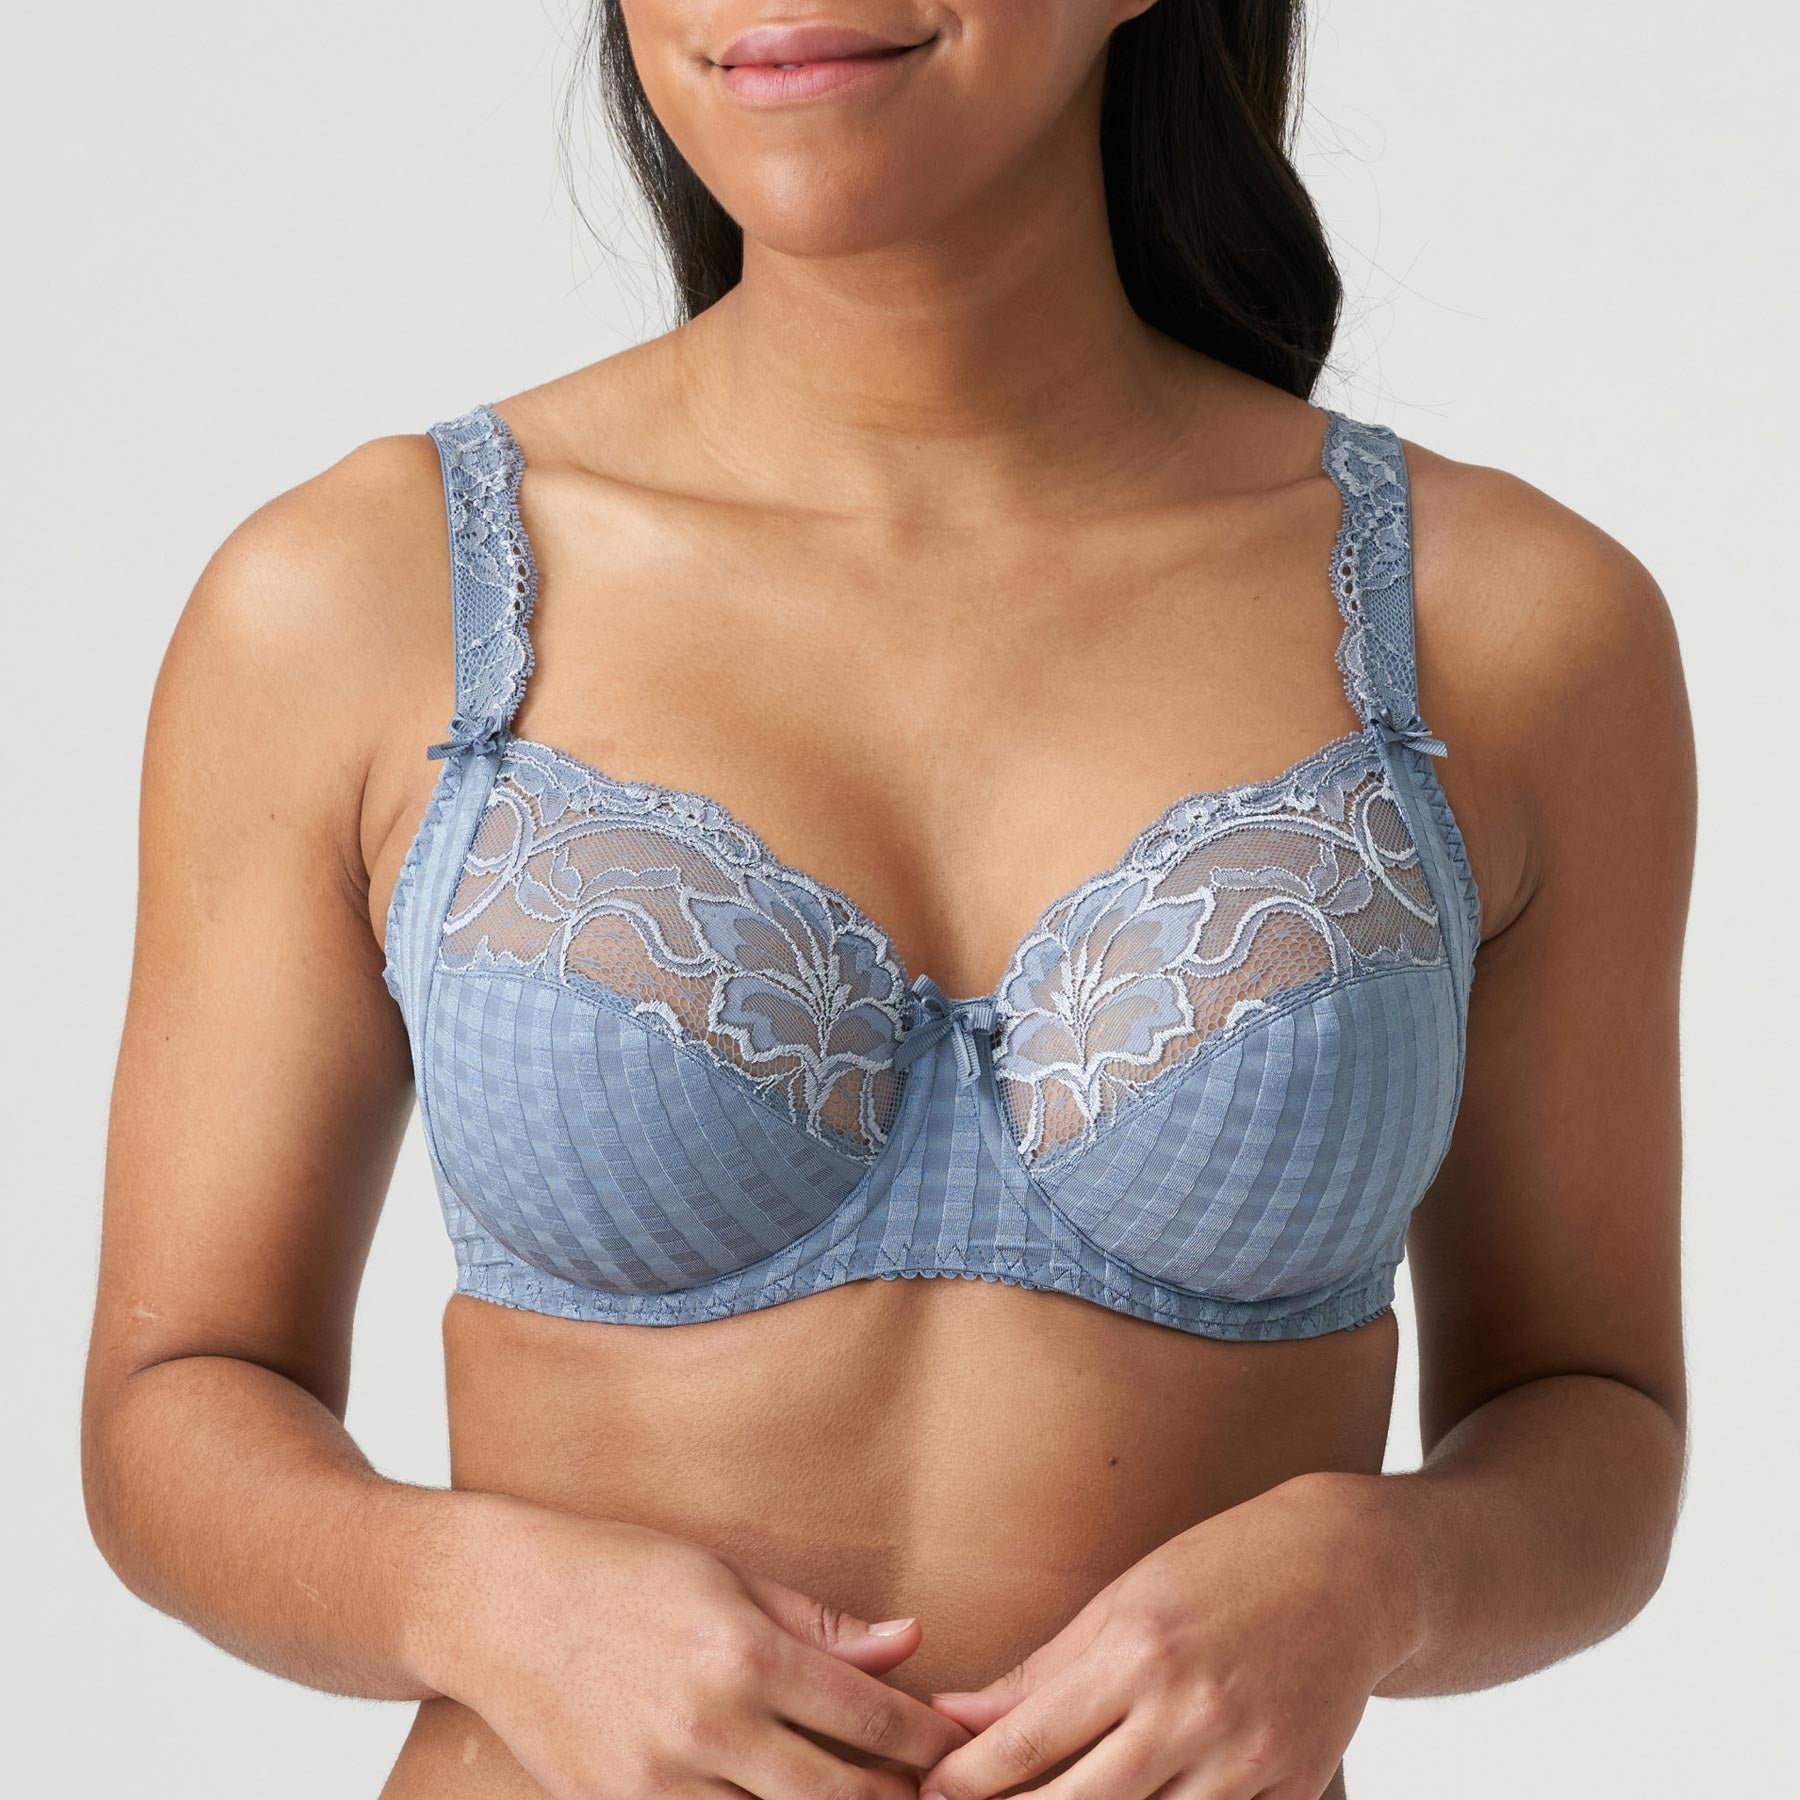 Best Deal for PrimaDonna Madison Full Cup Bra, 44E, Pearly Pink